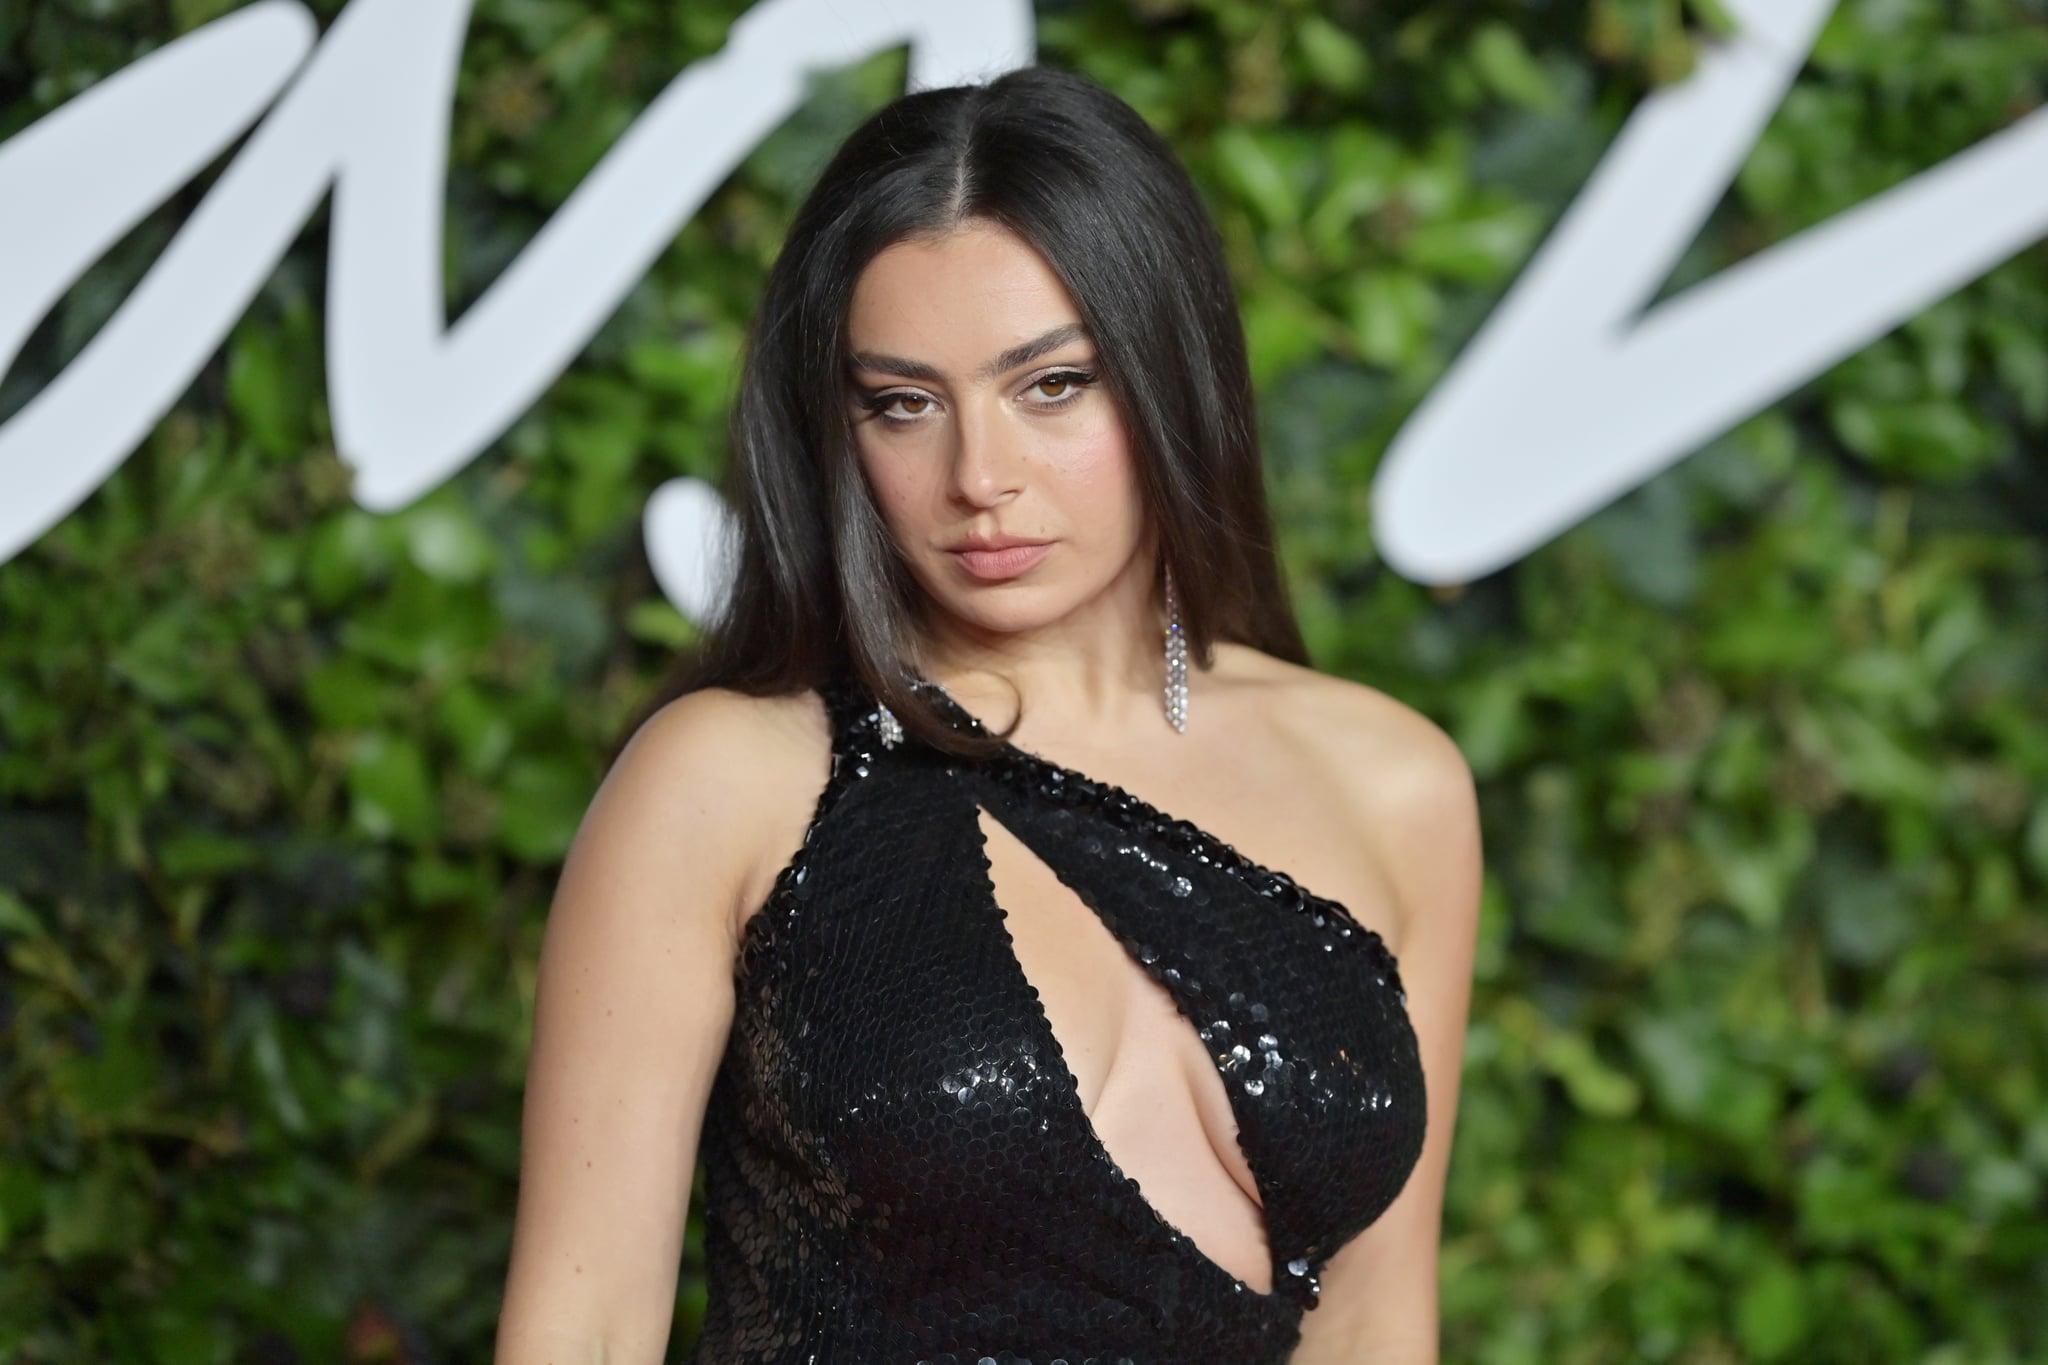 LONDON, ENGLAND - NOVEMBER 29: Charlie XCX attends The Fashion Awards 2021 at the Royal Albert Hall on November 29, 2021 in London, England. (Photo by Samir Hussein/WireImage)